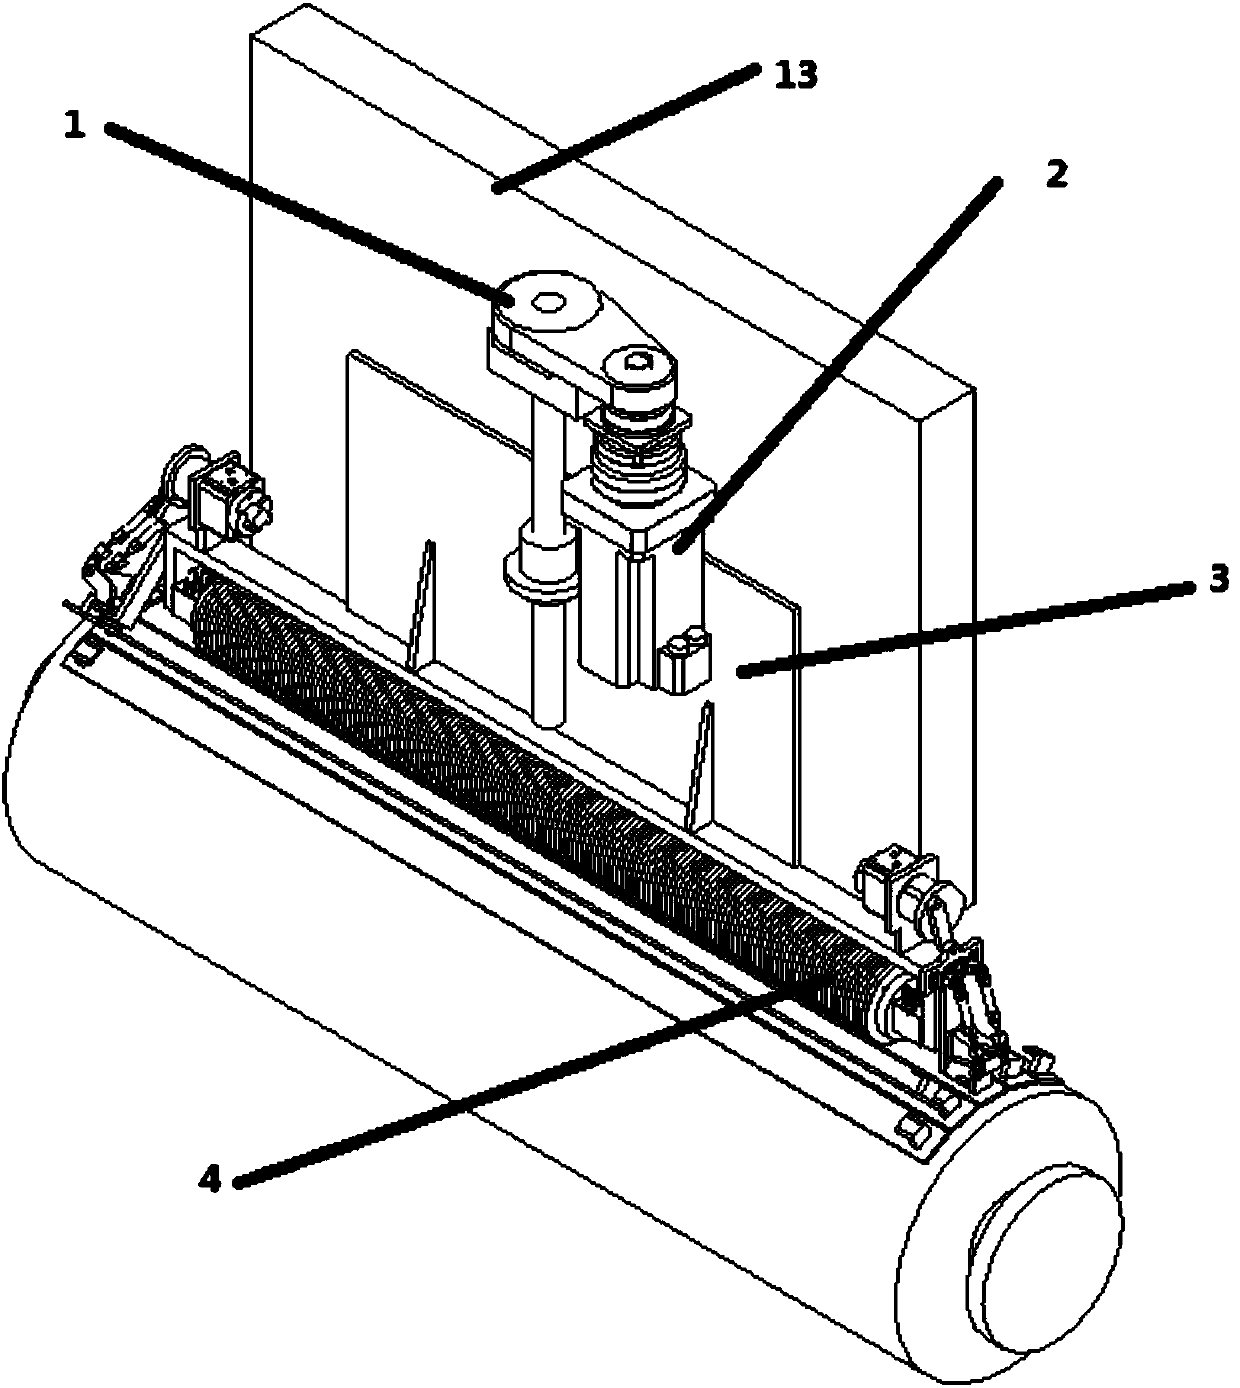 Multi-piece compression roller assembly and method for manufacturing pneumatic tire